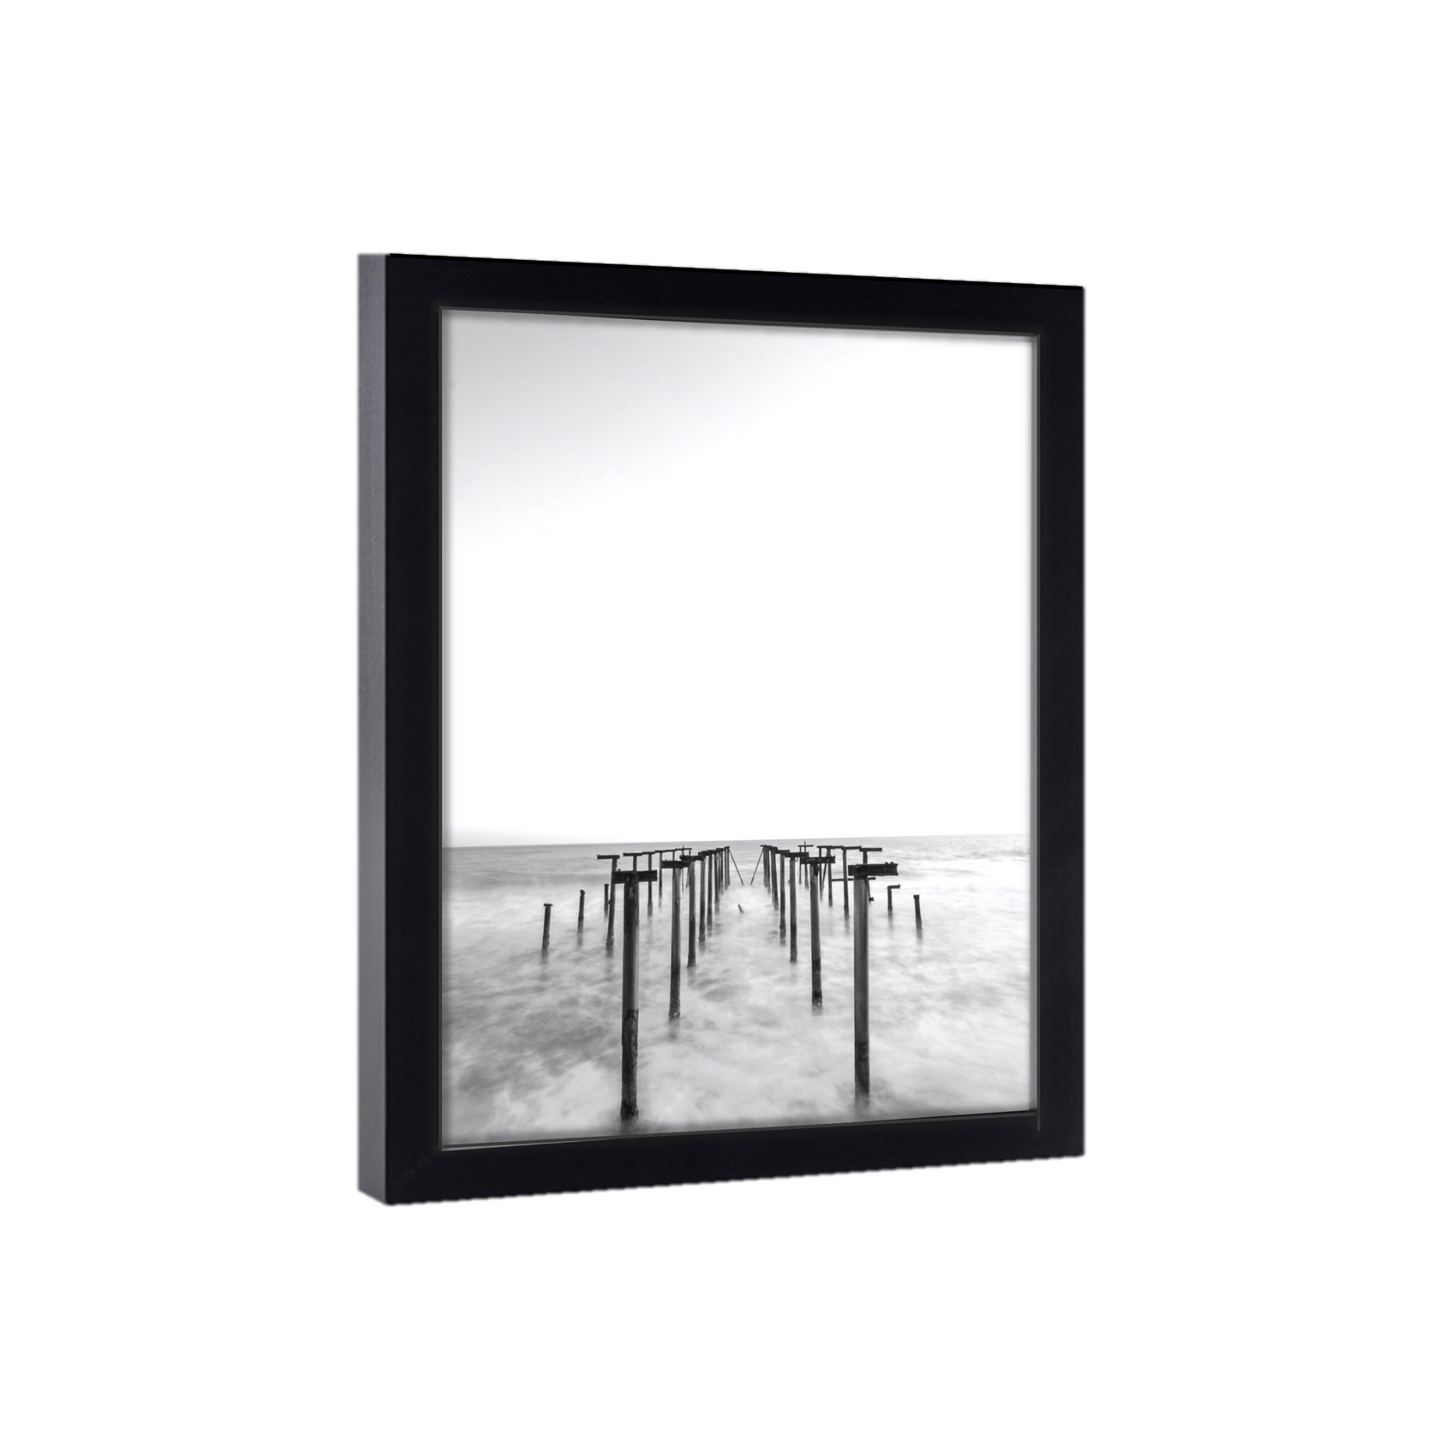 Gallery Wall 8x4 Picture Frame Black Wood 8x4  Poster Size